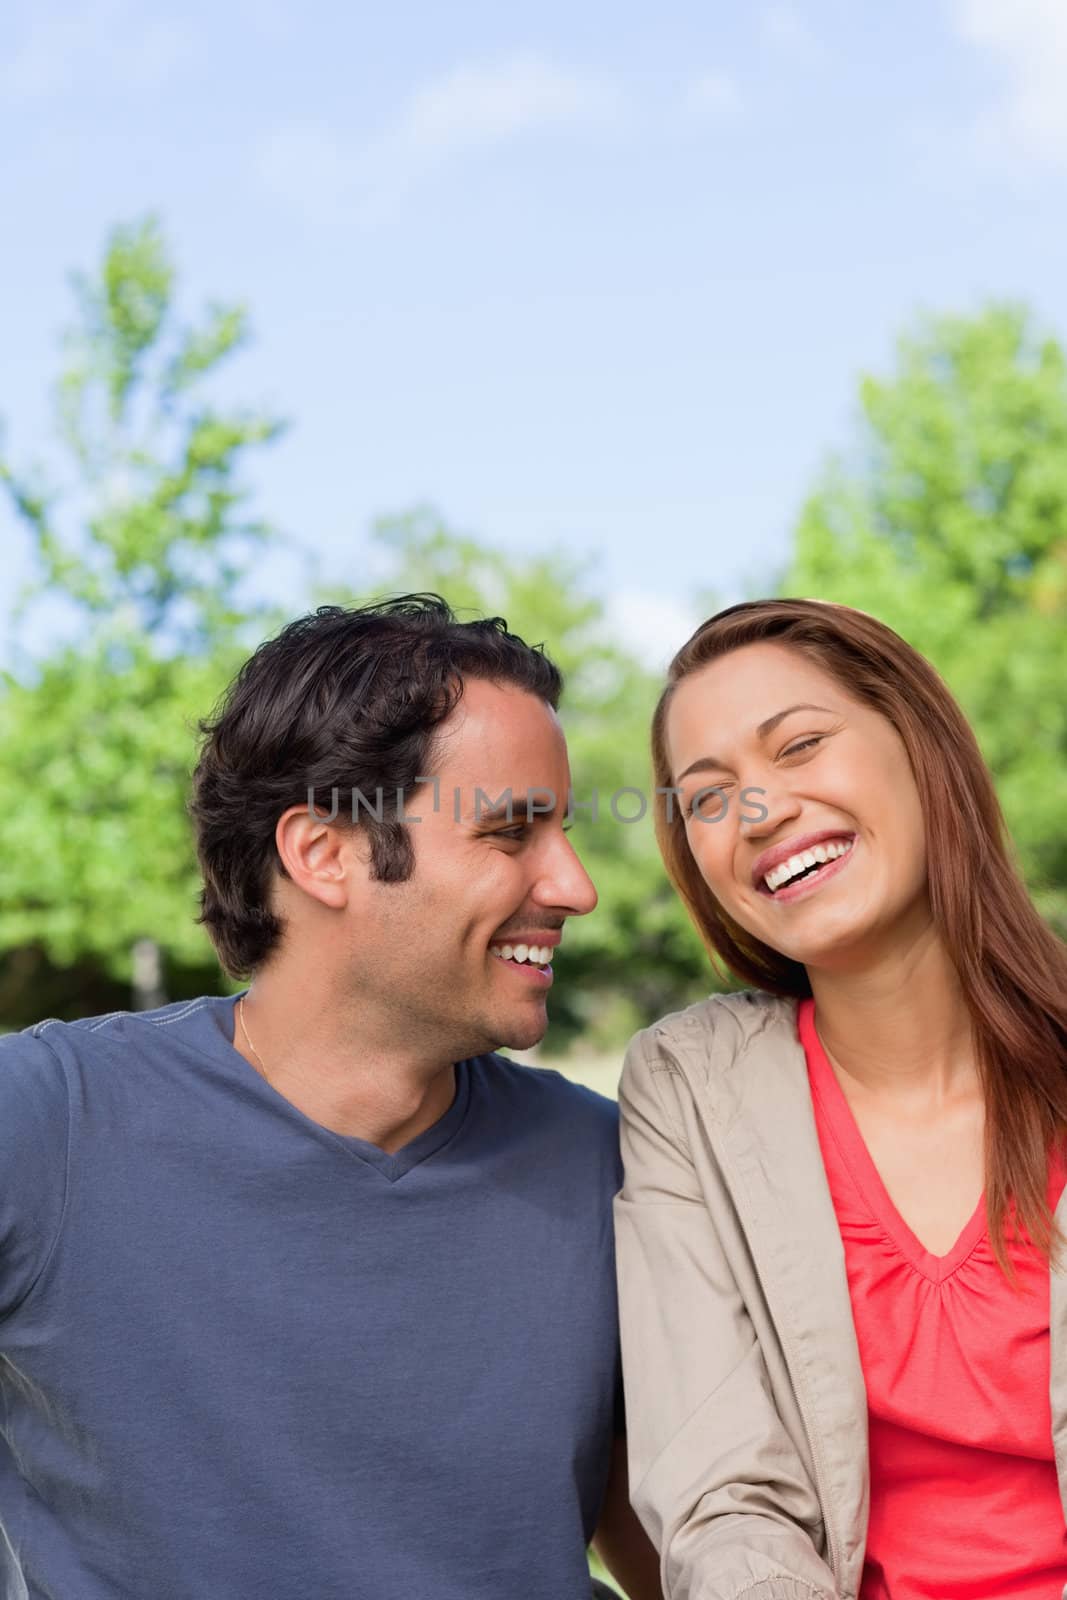 Man happily looking his friend as she is laughing joyfully in a park on a sunny day